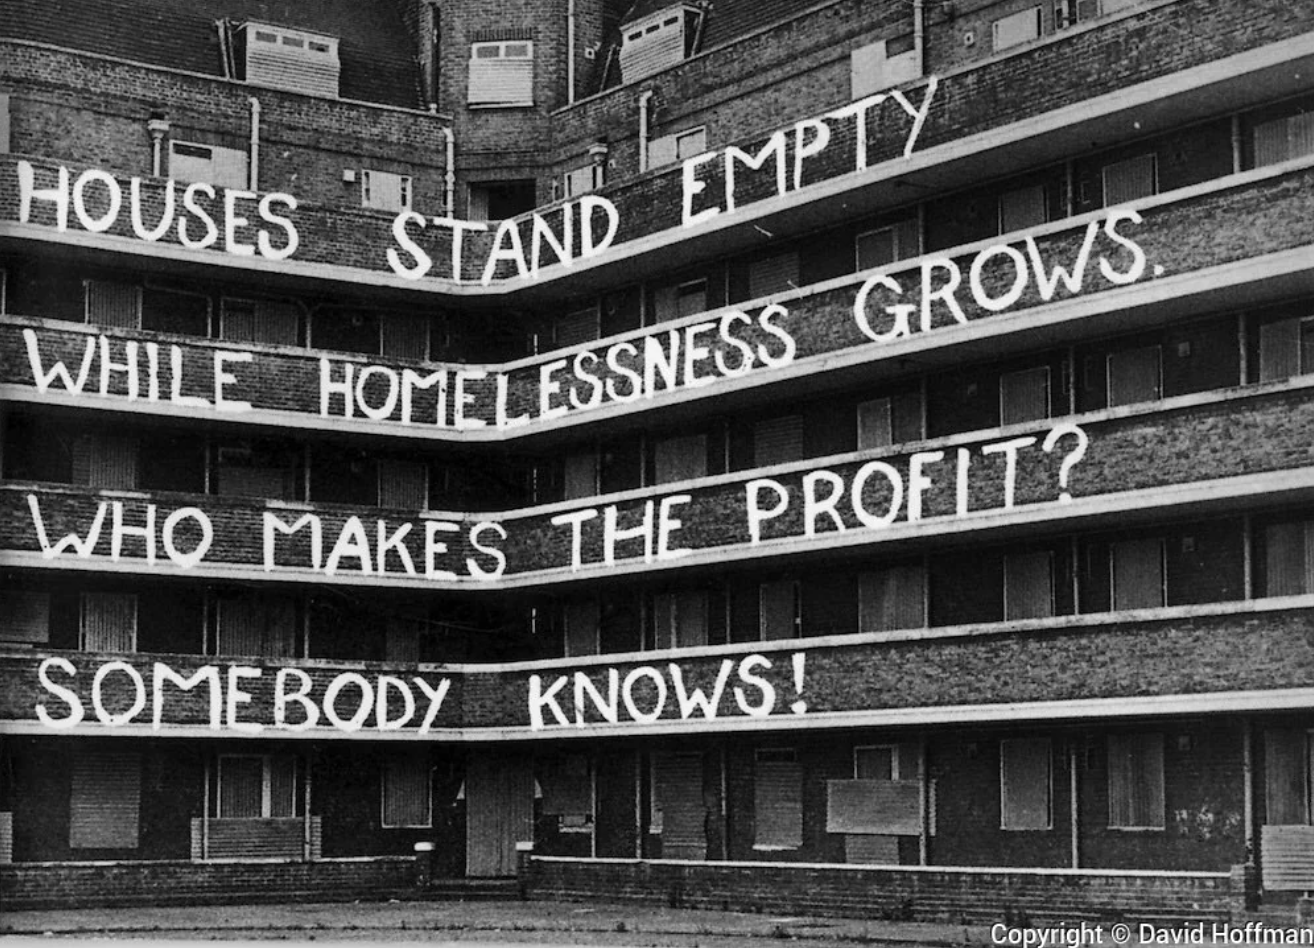 houses stand empty while homelessness grows - Houses Stand Empty While Homelessness Grows. Who Makes The Profit? Somebody Knows! Copyright David Hoffman